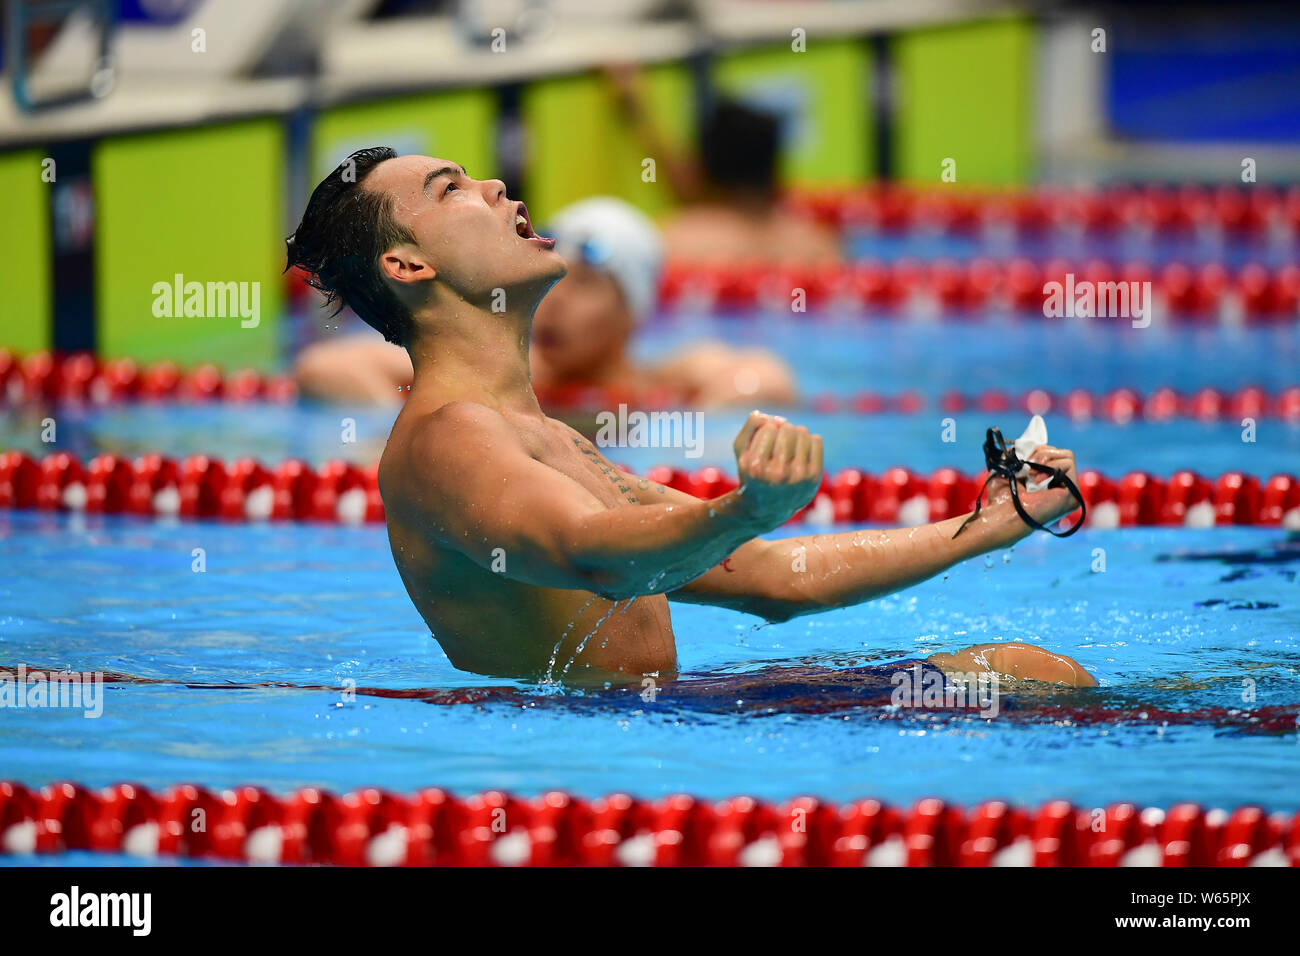 Yu Hexin Of China Reacts After Winning The Men S 4x100 Medley Relay Swimming Final During The 2018 Asian Games Officially Known As The 18th Asian Gam Stock Photo Alamy